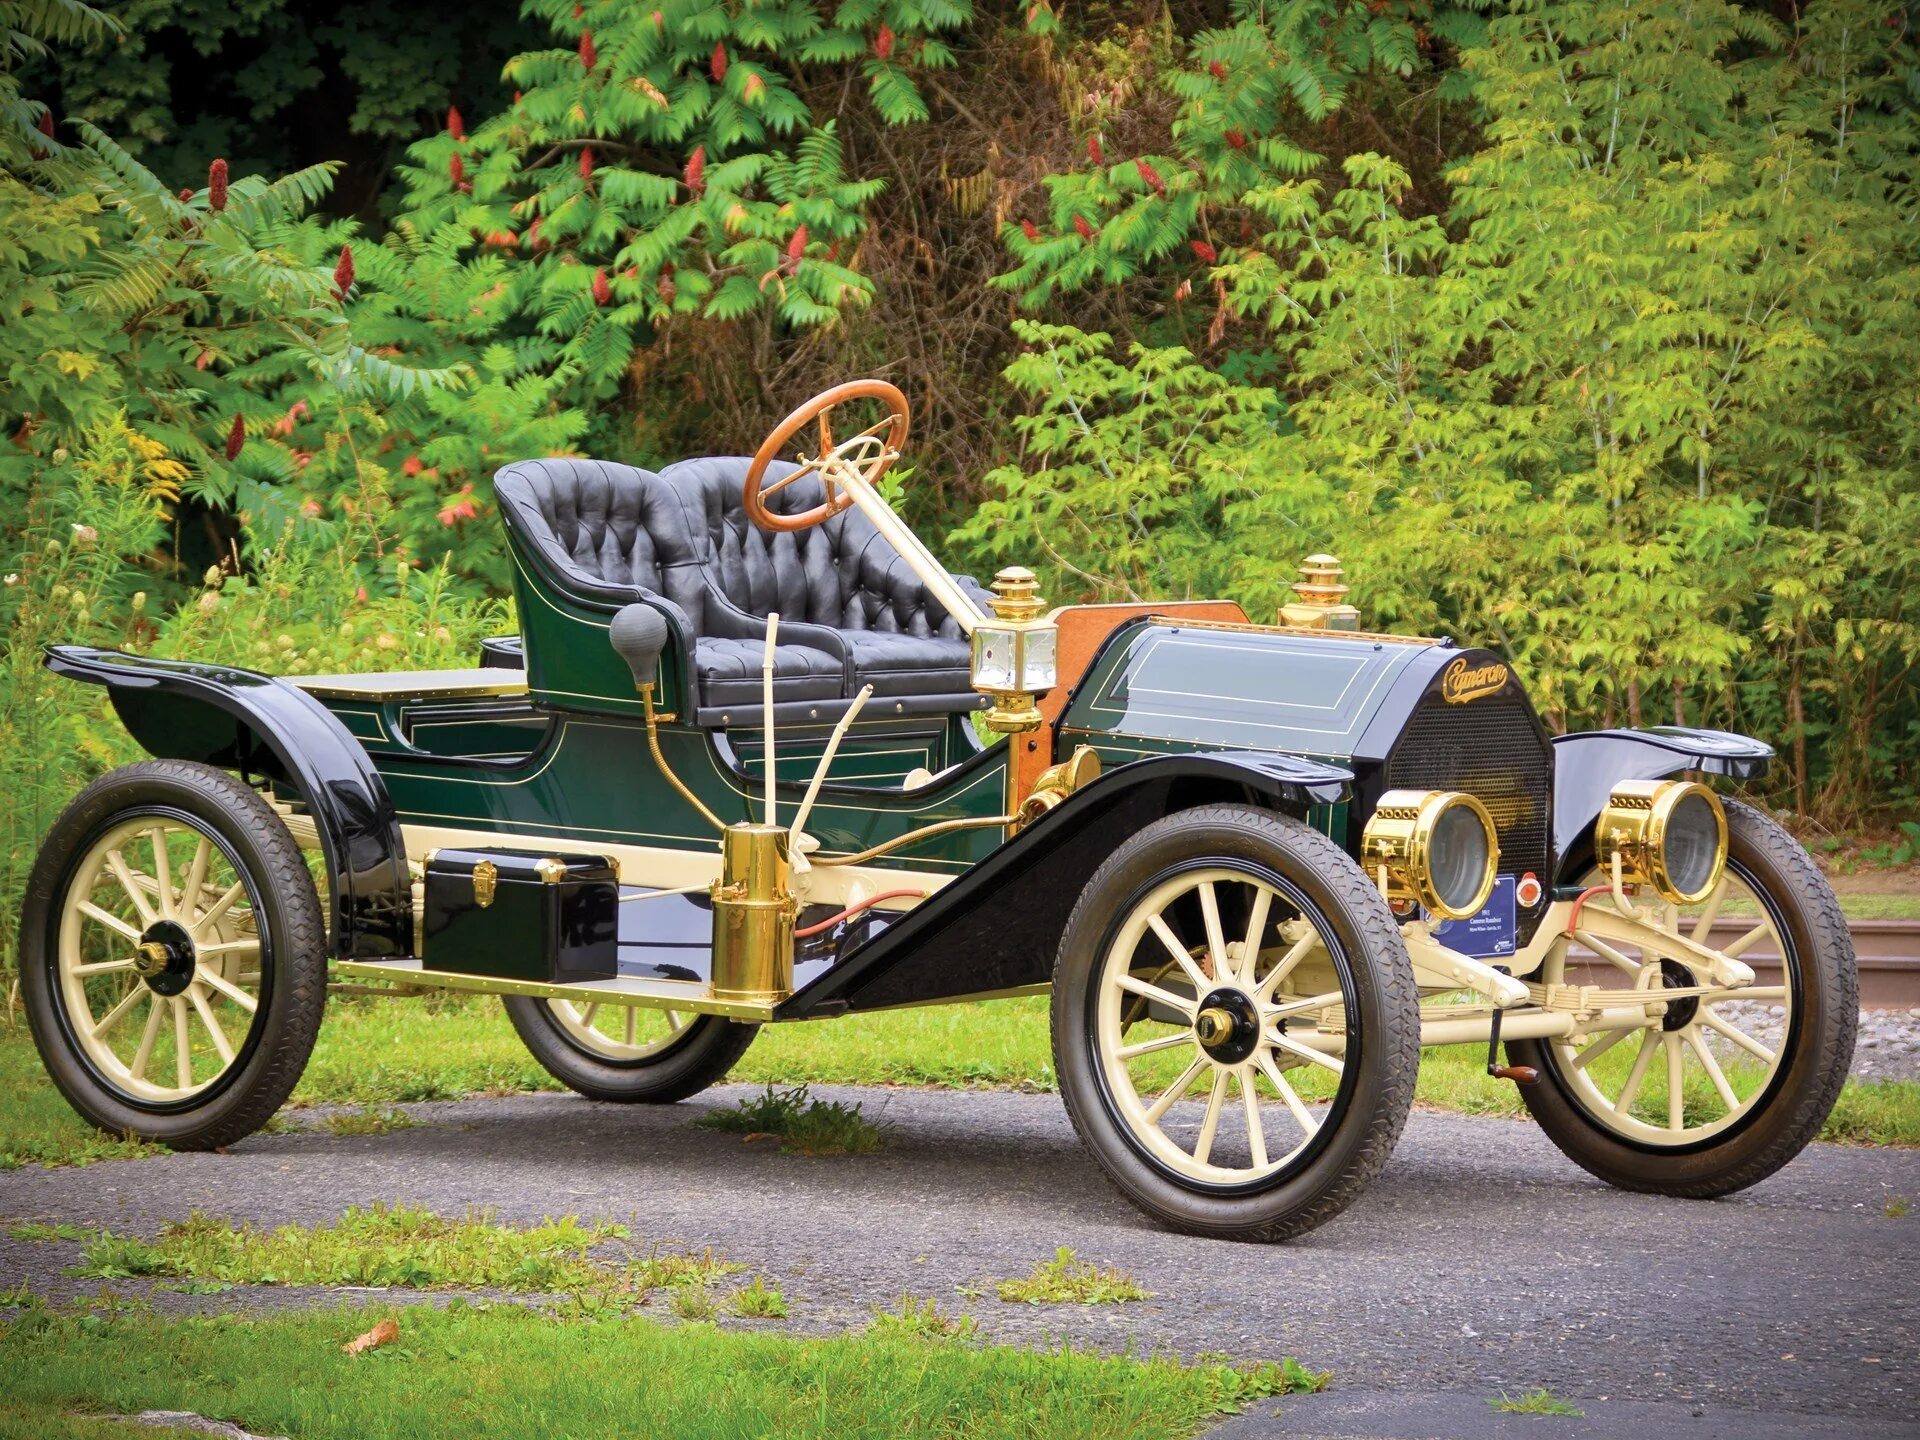 Автомобиль 18. Cadillac 1907. Ford Runabout 1900-1910. Buick model Runabout 1914. Кузов Runabout, 1910-1914.